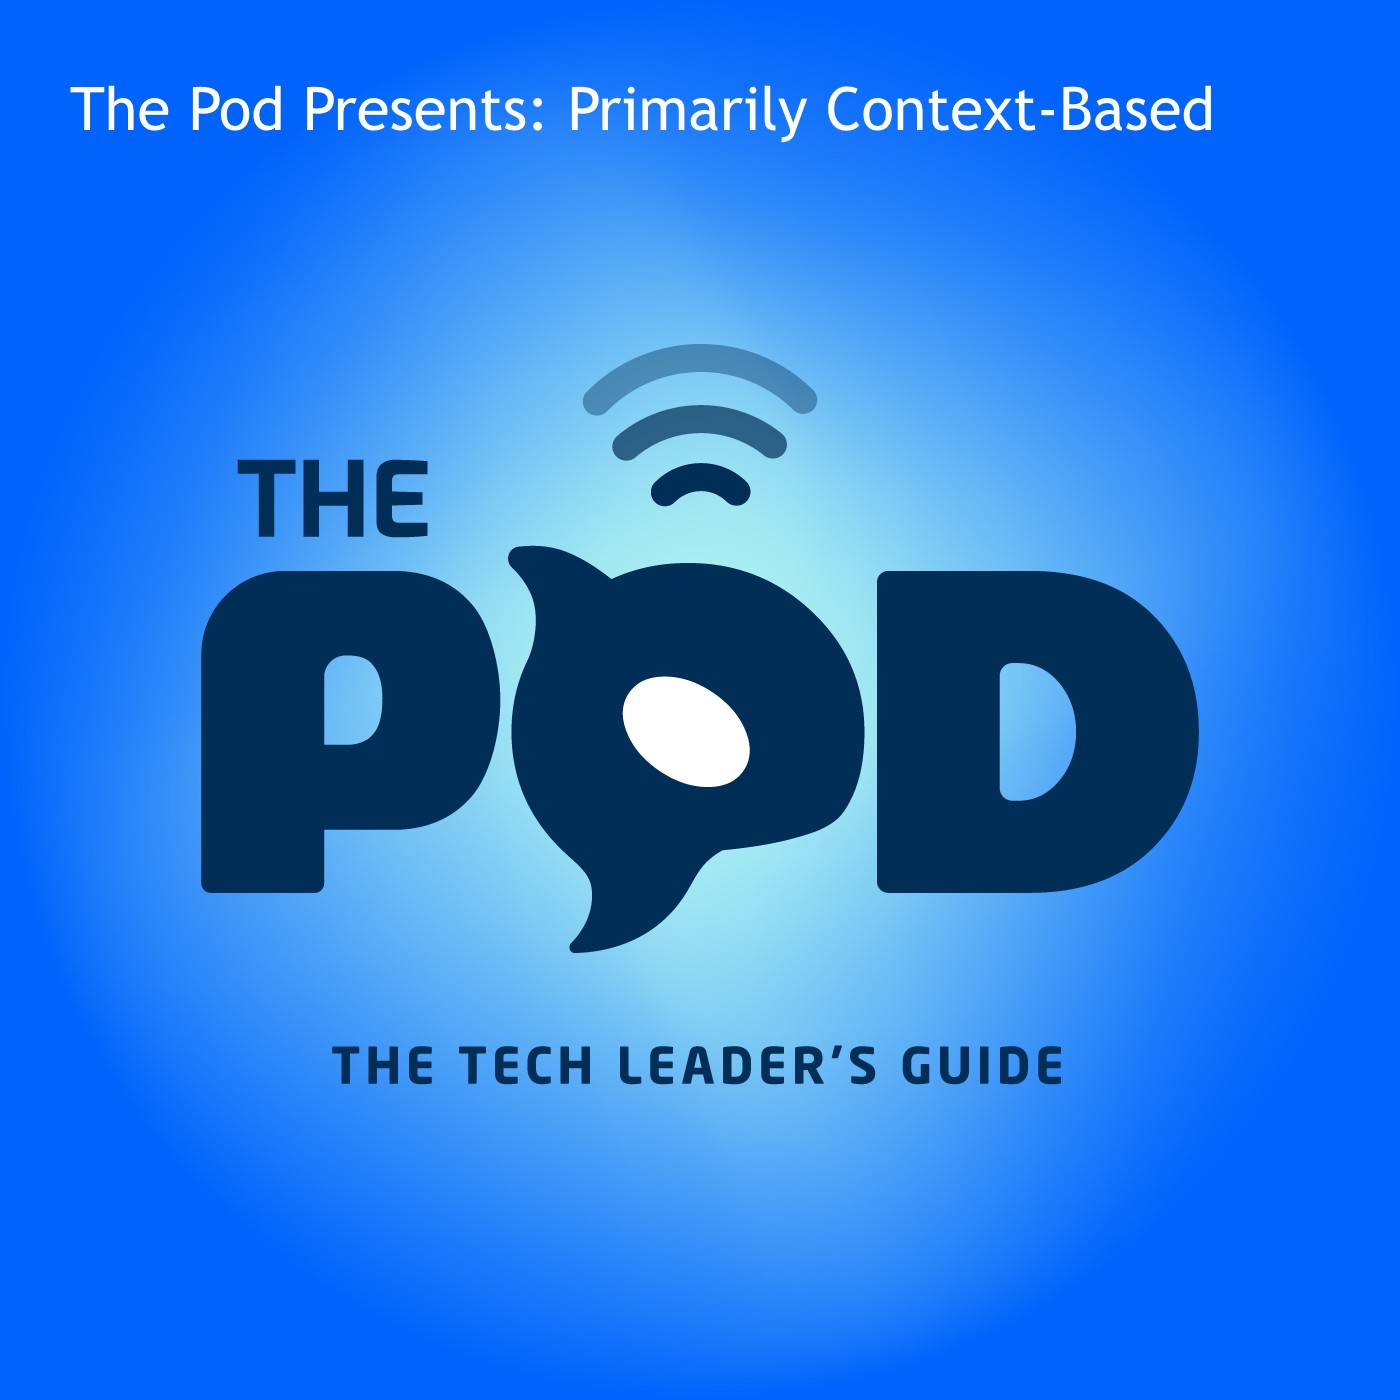 The Pod Presents: Primarily Context-Based